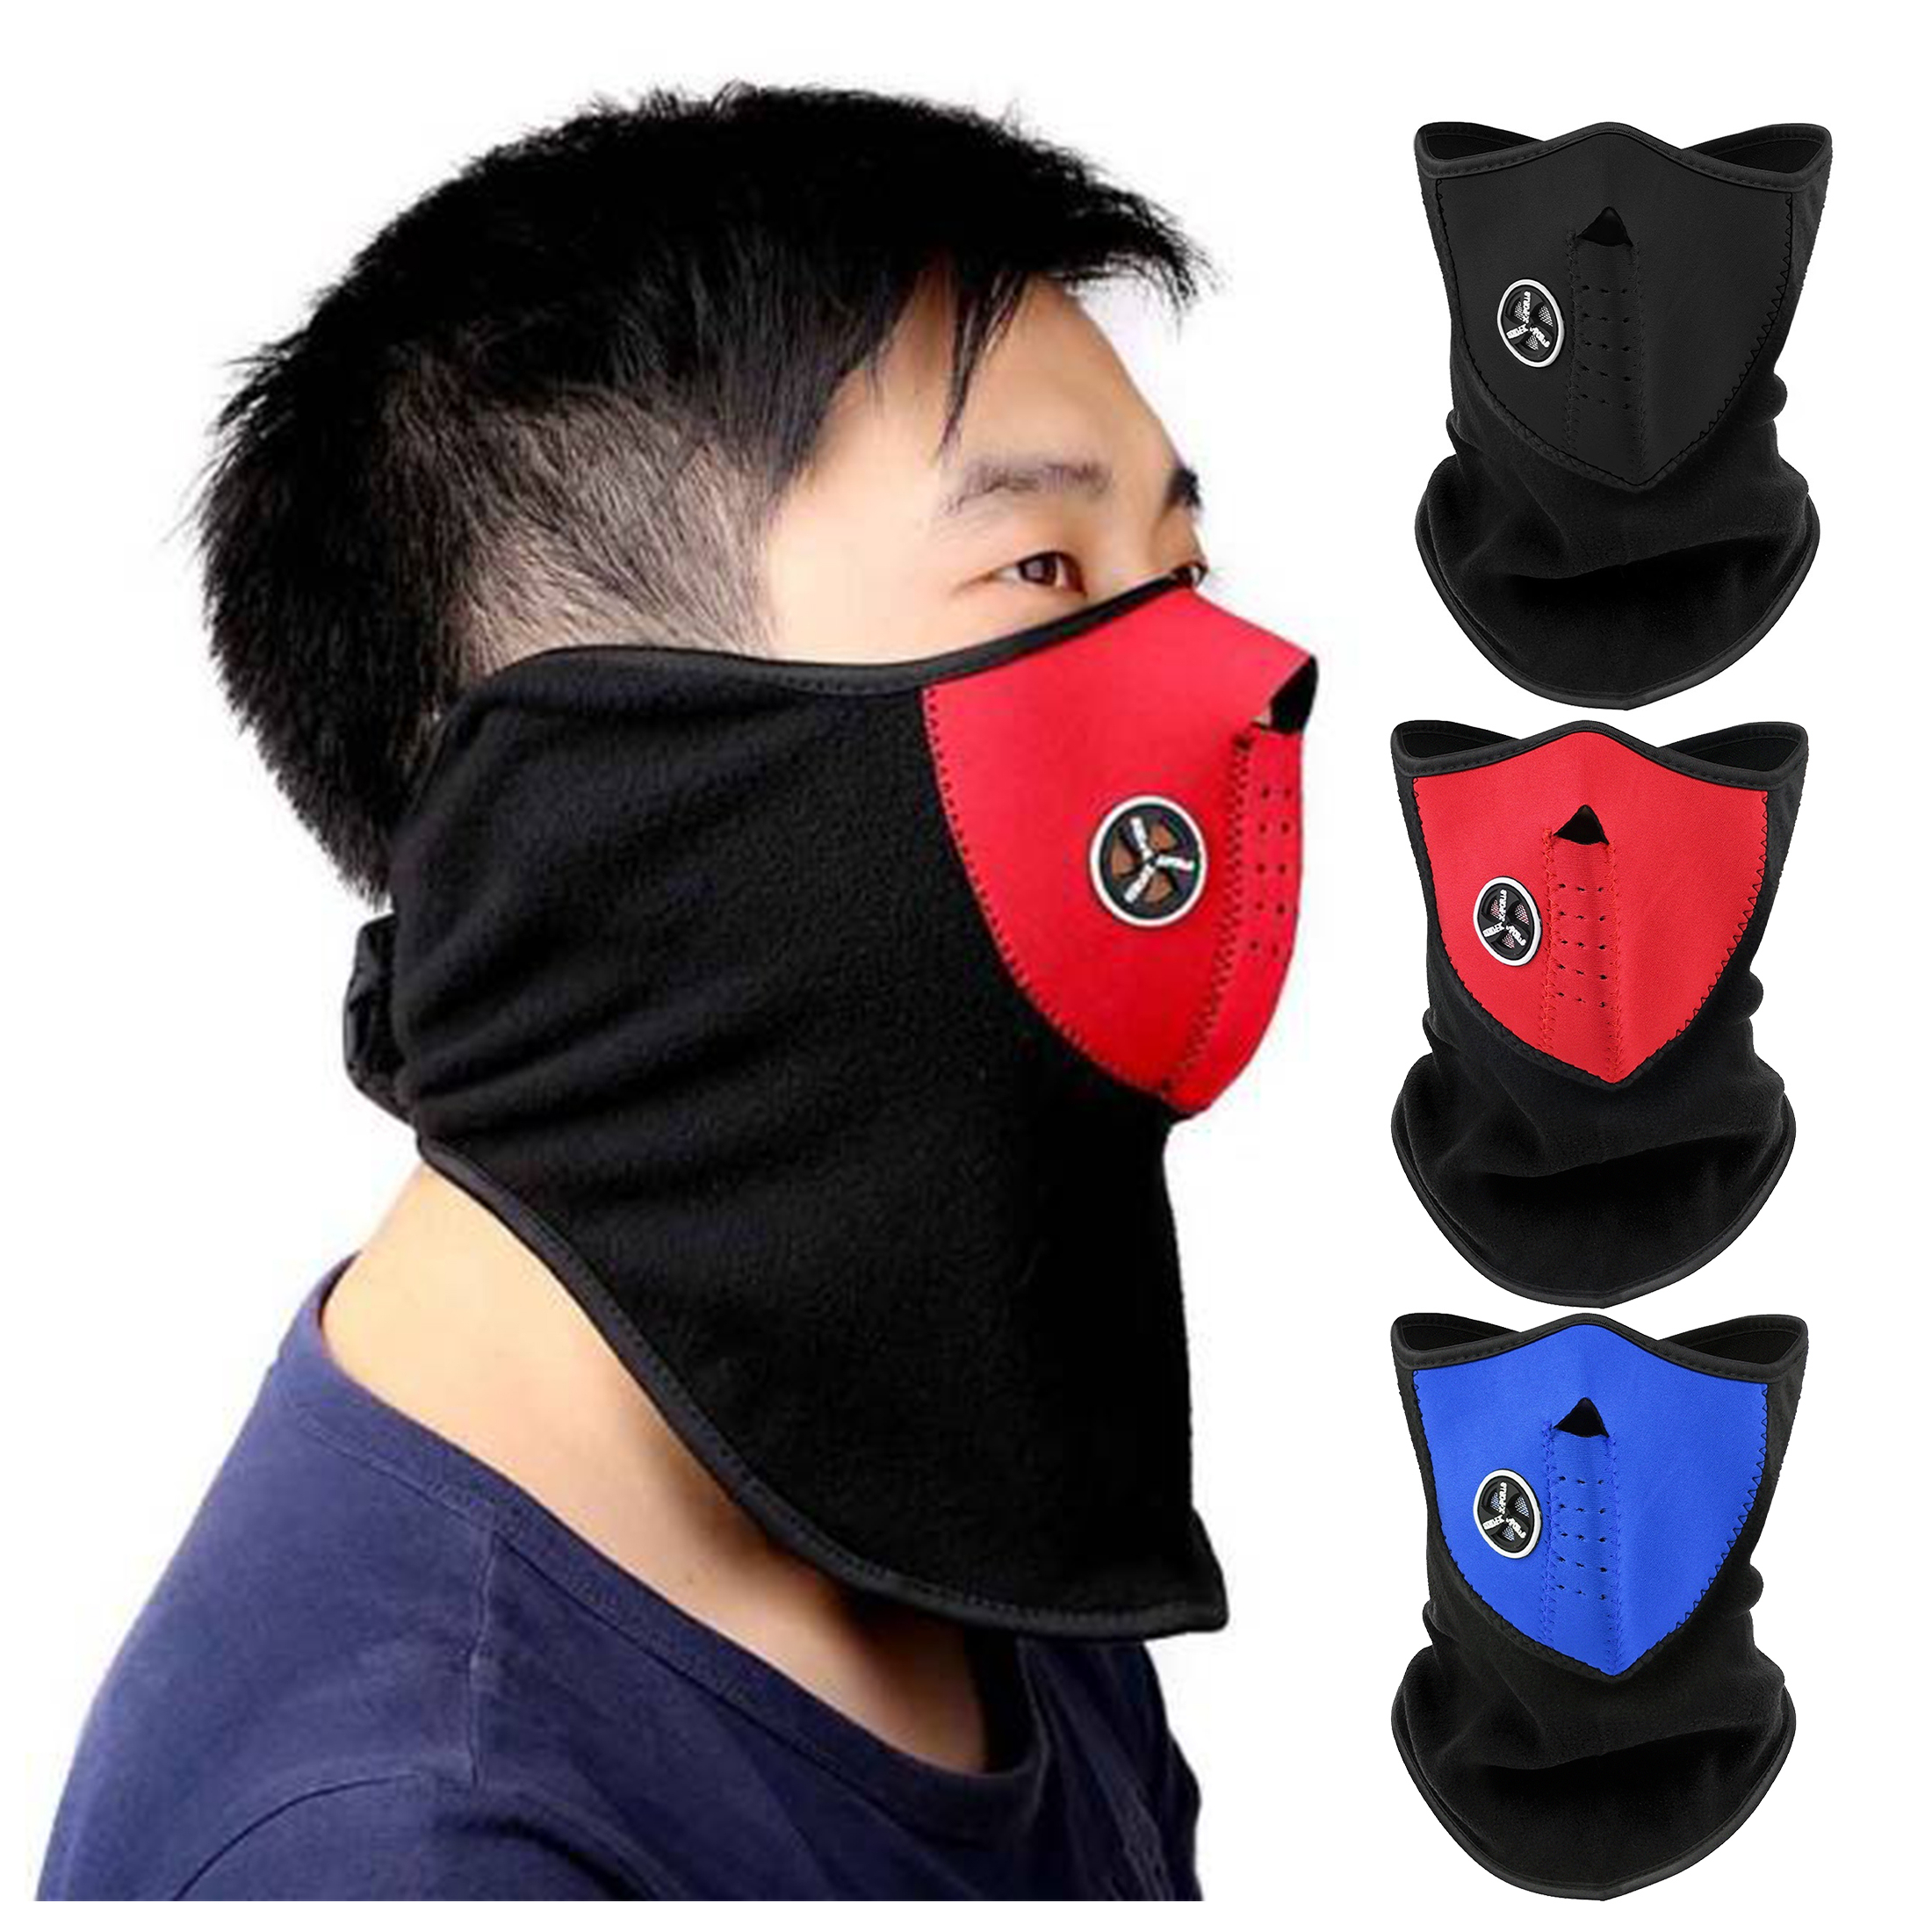 2-Pack: Men's Warm Windproof Breathable Thermal Balaclava Winter Ski Face Mask - Half Face